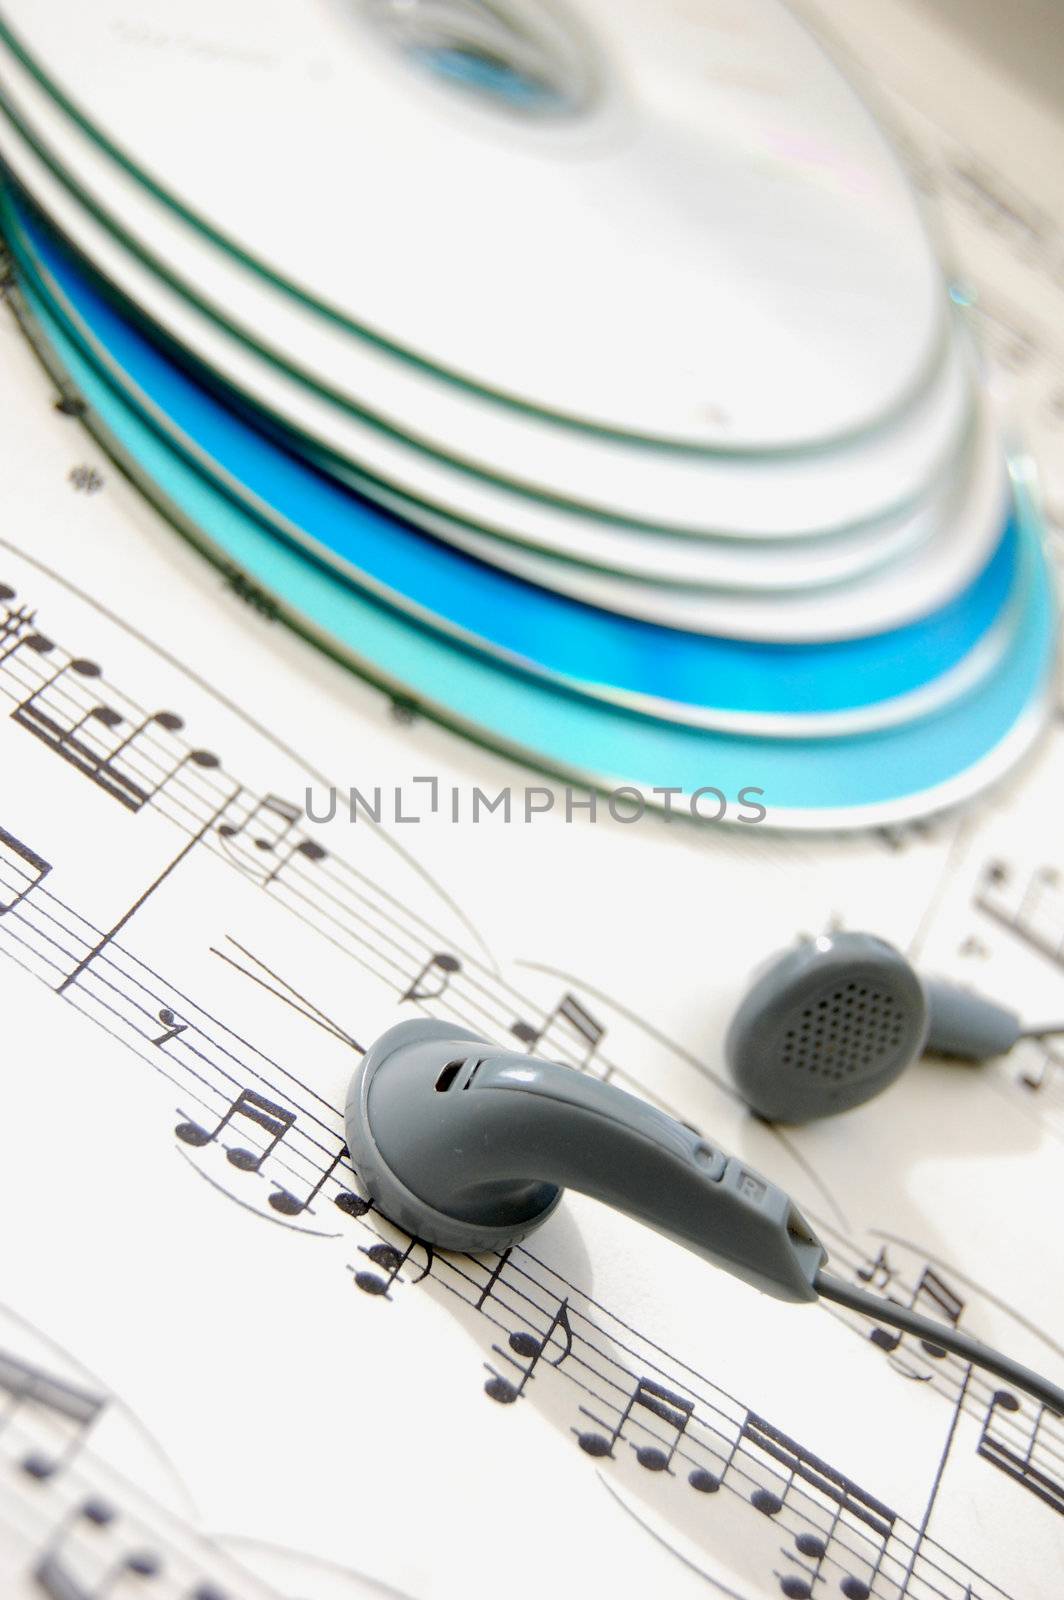 A pair of headphones on a music score with cds